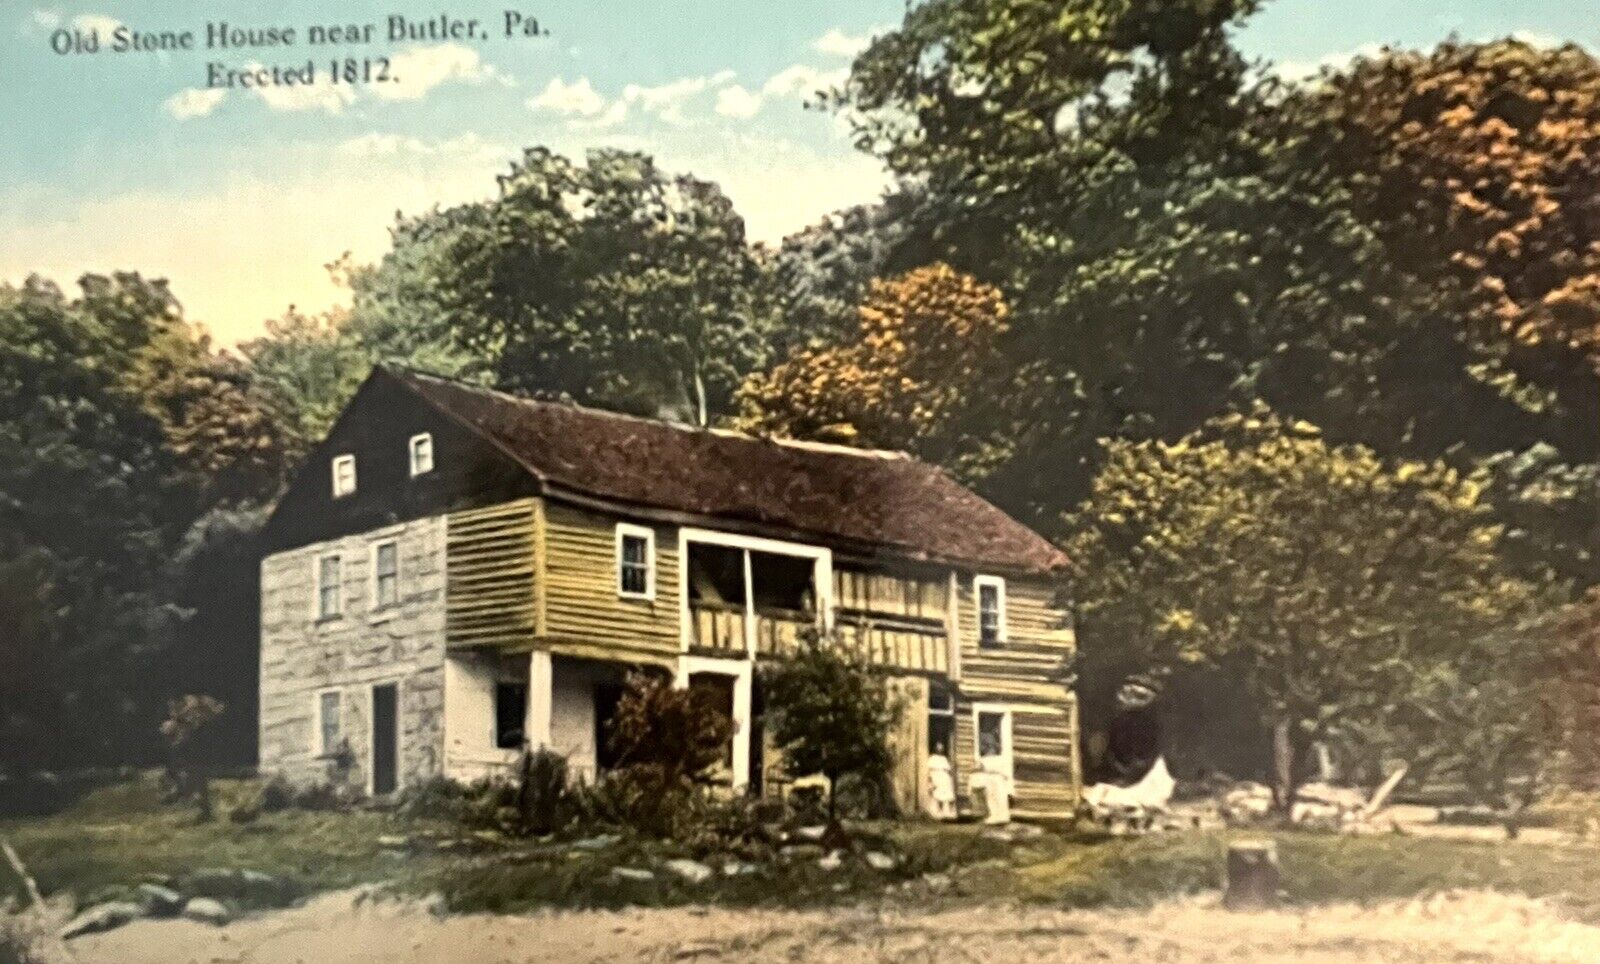 Postcard Antique Butler, PA Old Stone House Erected 1812  Posted 1920